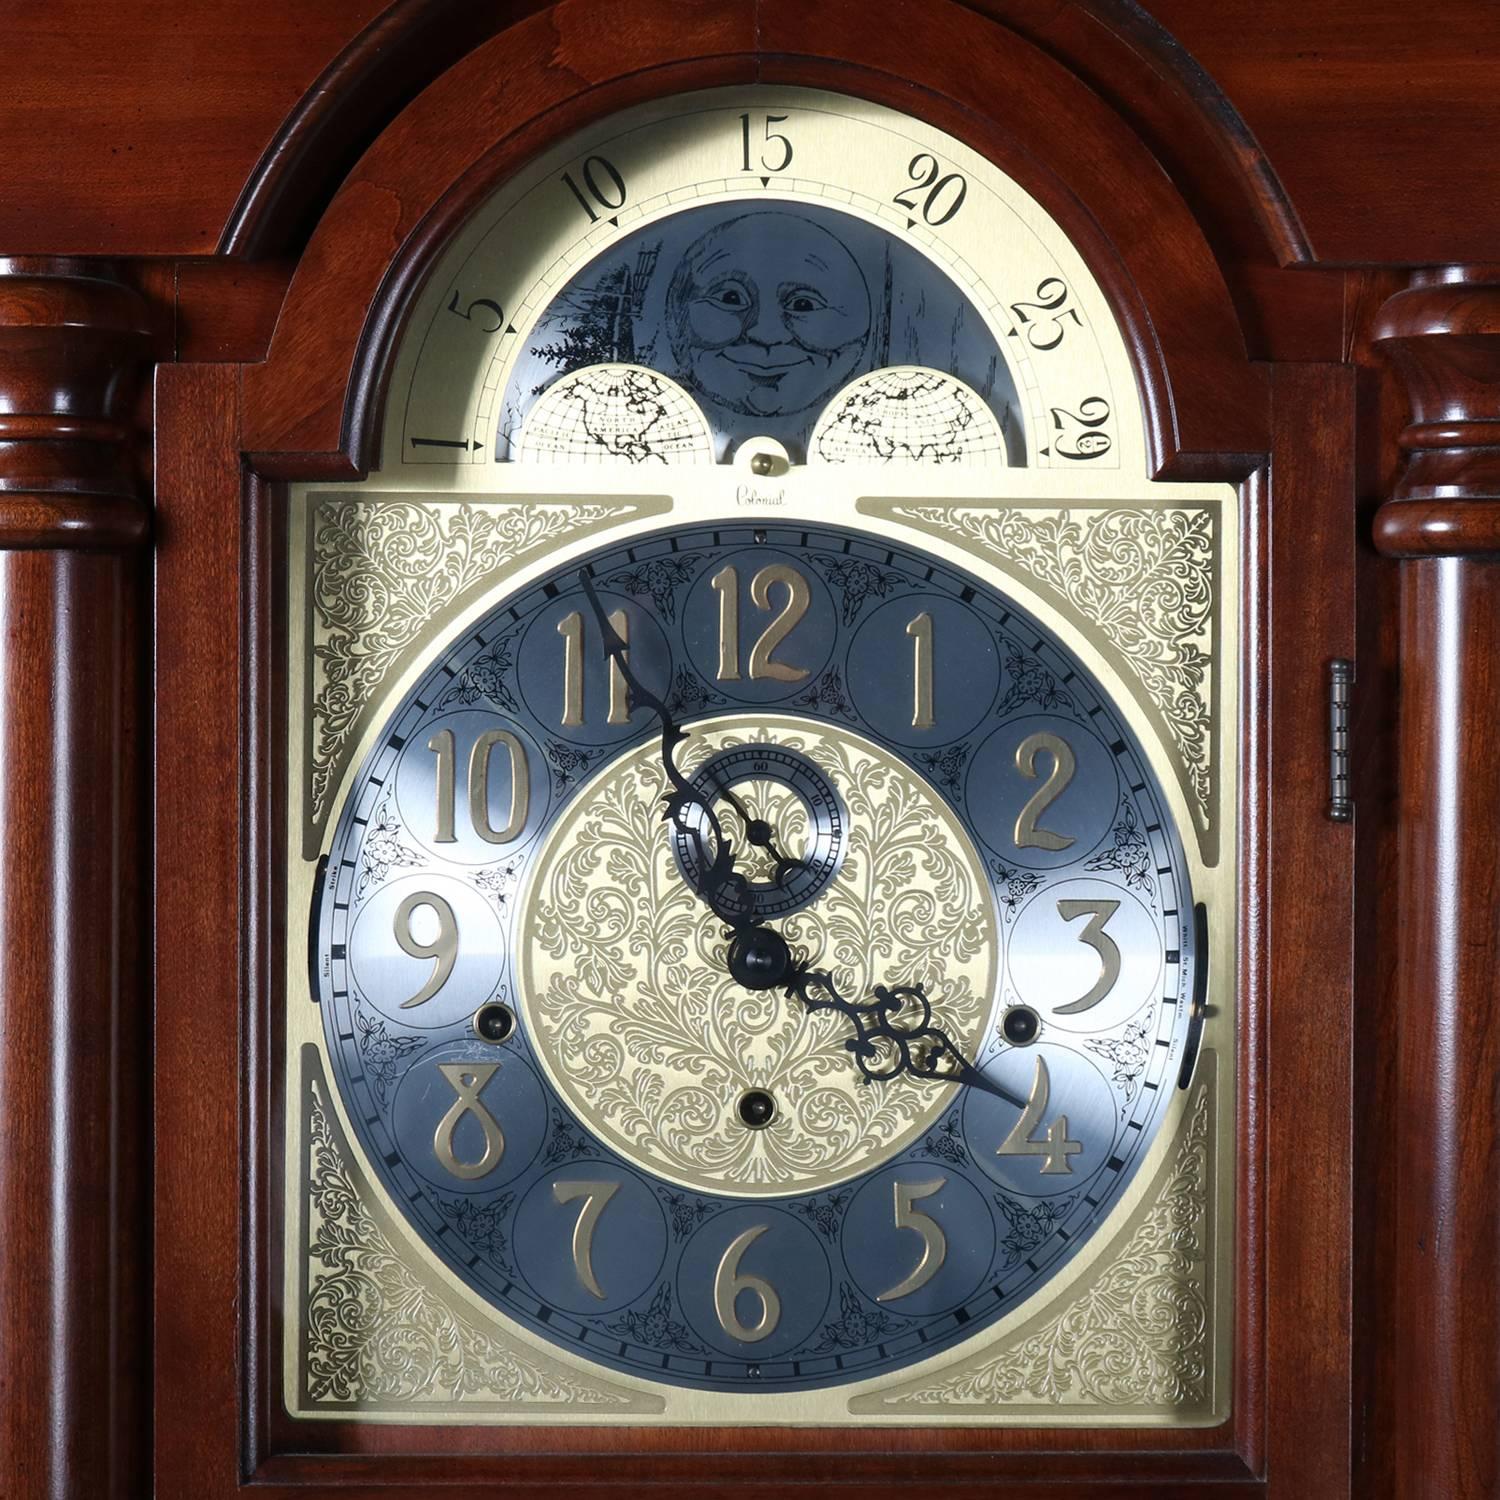 Vintage tall case clock by Colonial Molyneux features mahogany case with flanking columns and moon phase face, three key wind and three weight movement, in working condition, chimes on the quarter hour with hour count, Serial #8405721, original